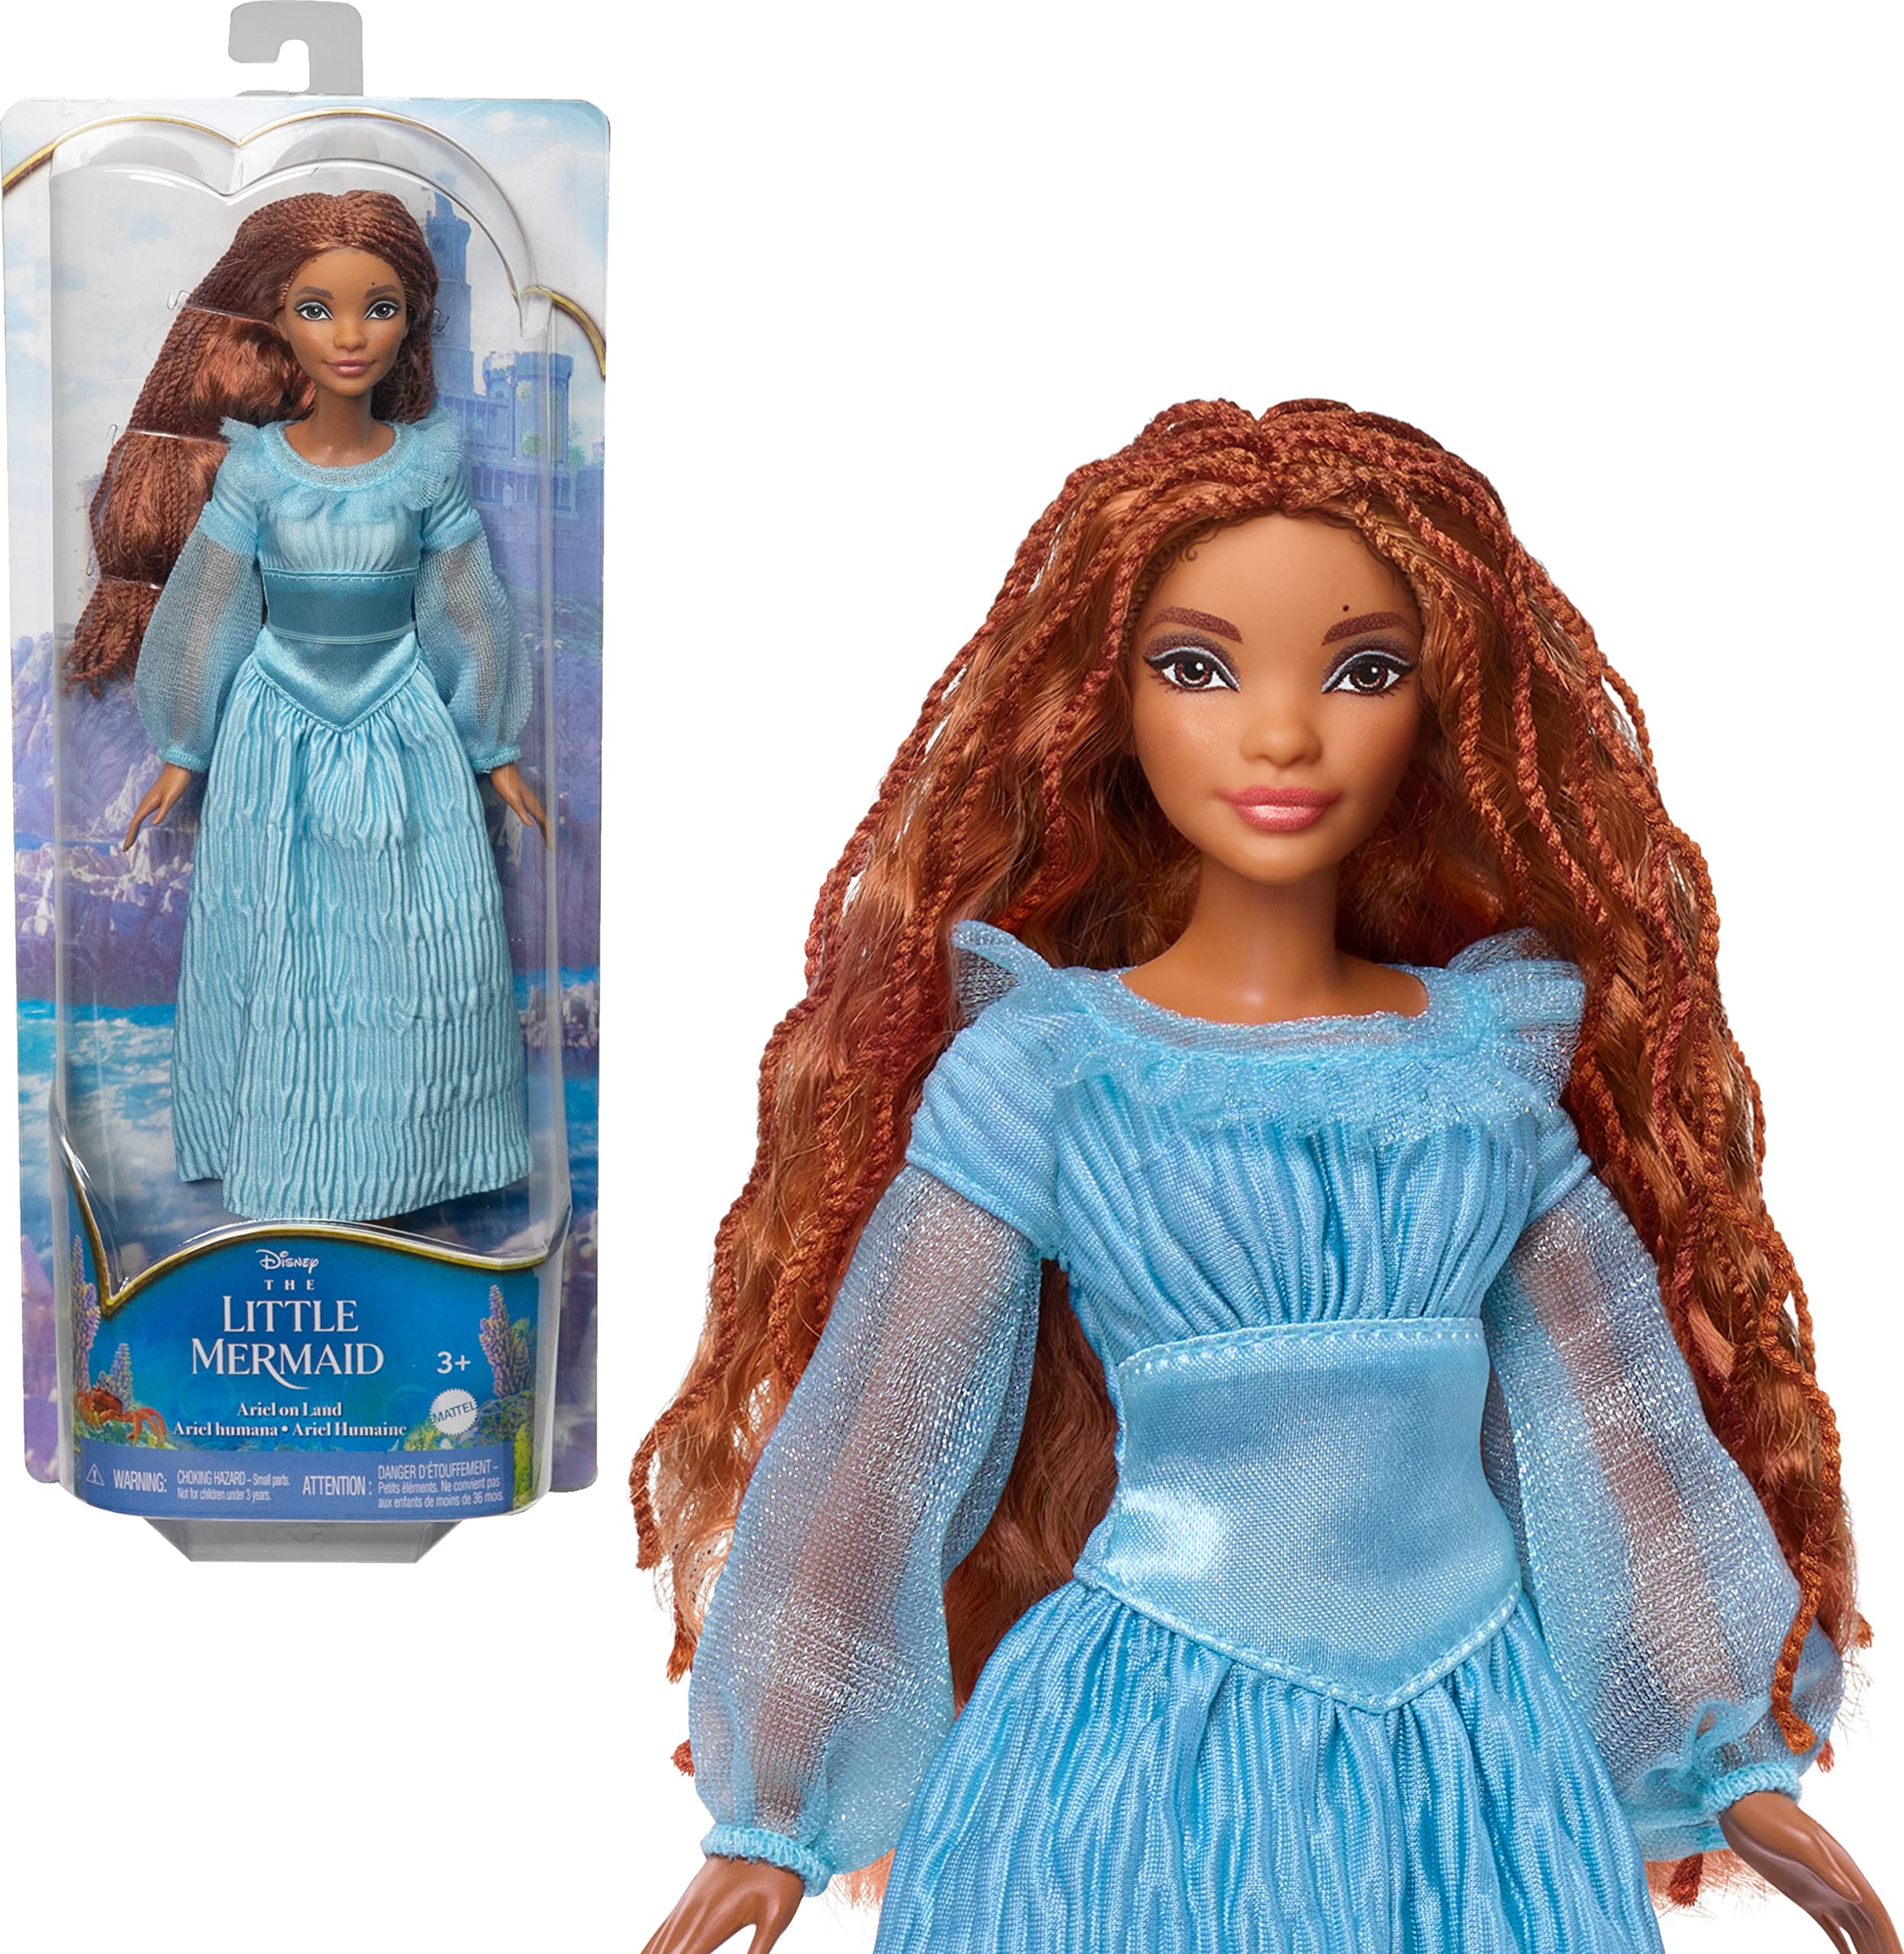 Mattel Ariel Fashion Doll on Land In Signature Blue Dress, Toys Inspired by Disney's the Little Mermaid